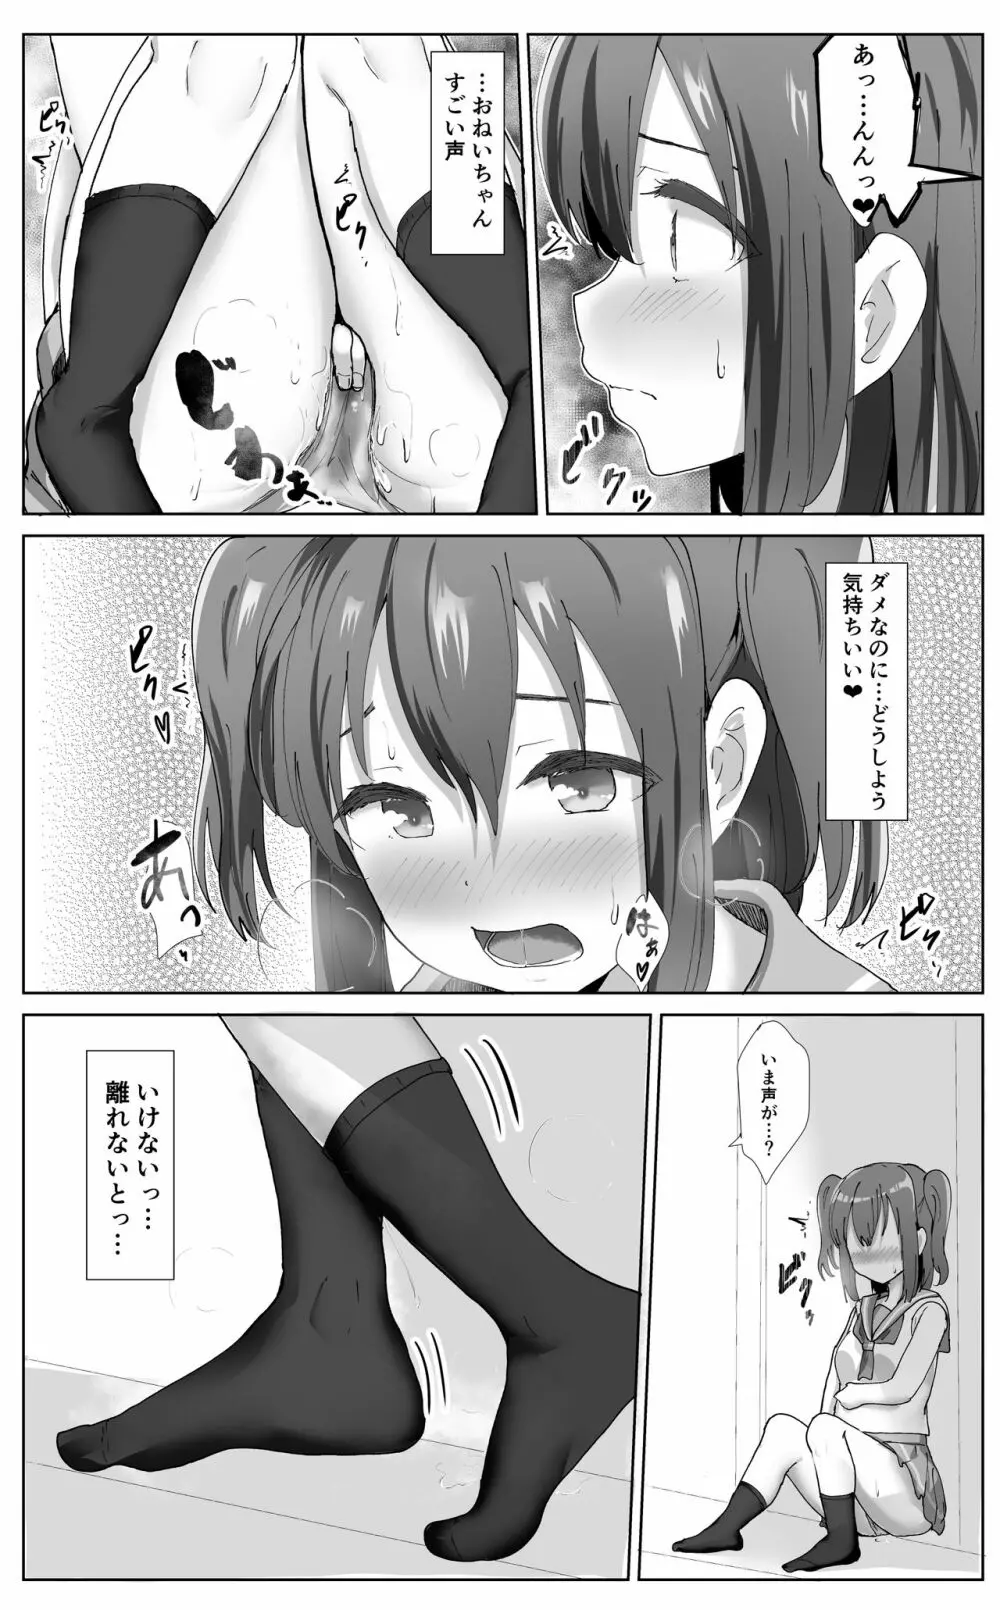 e-rn fanbox short love live doujinshi collection - page3